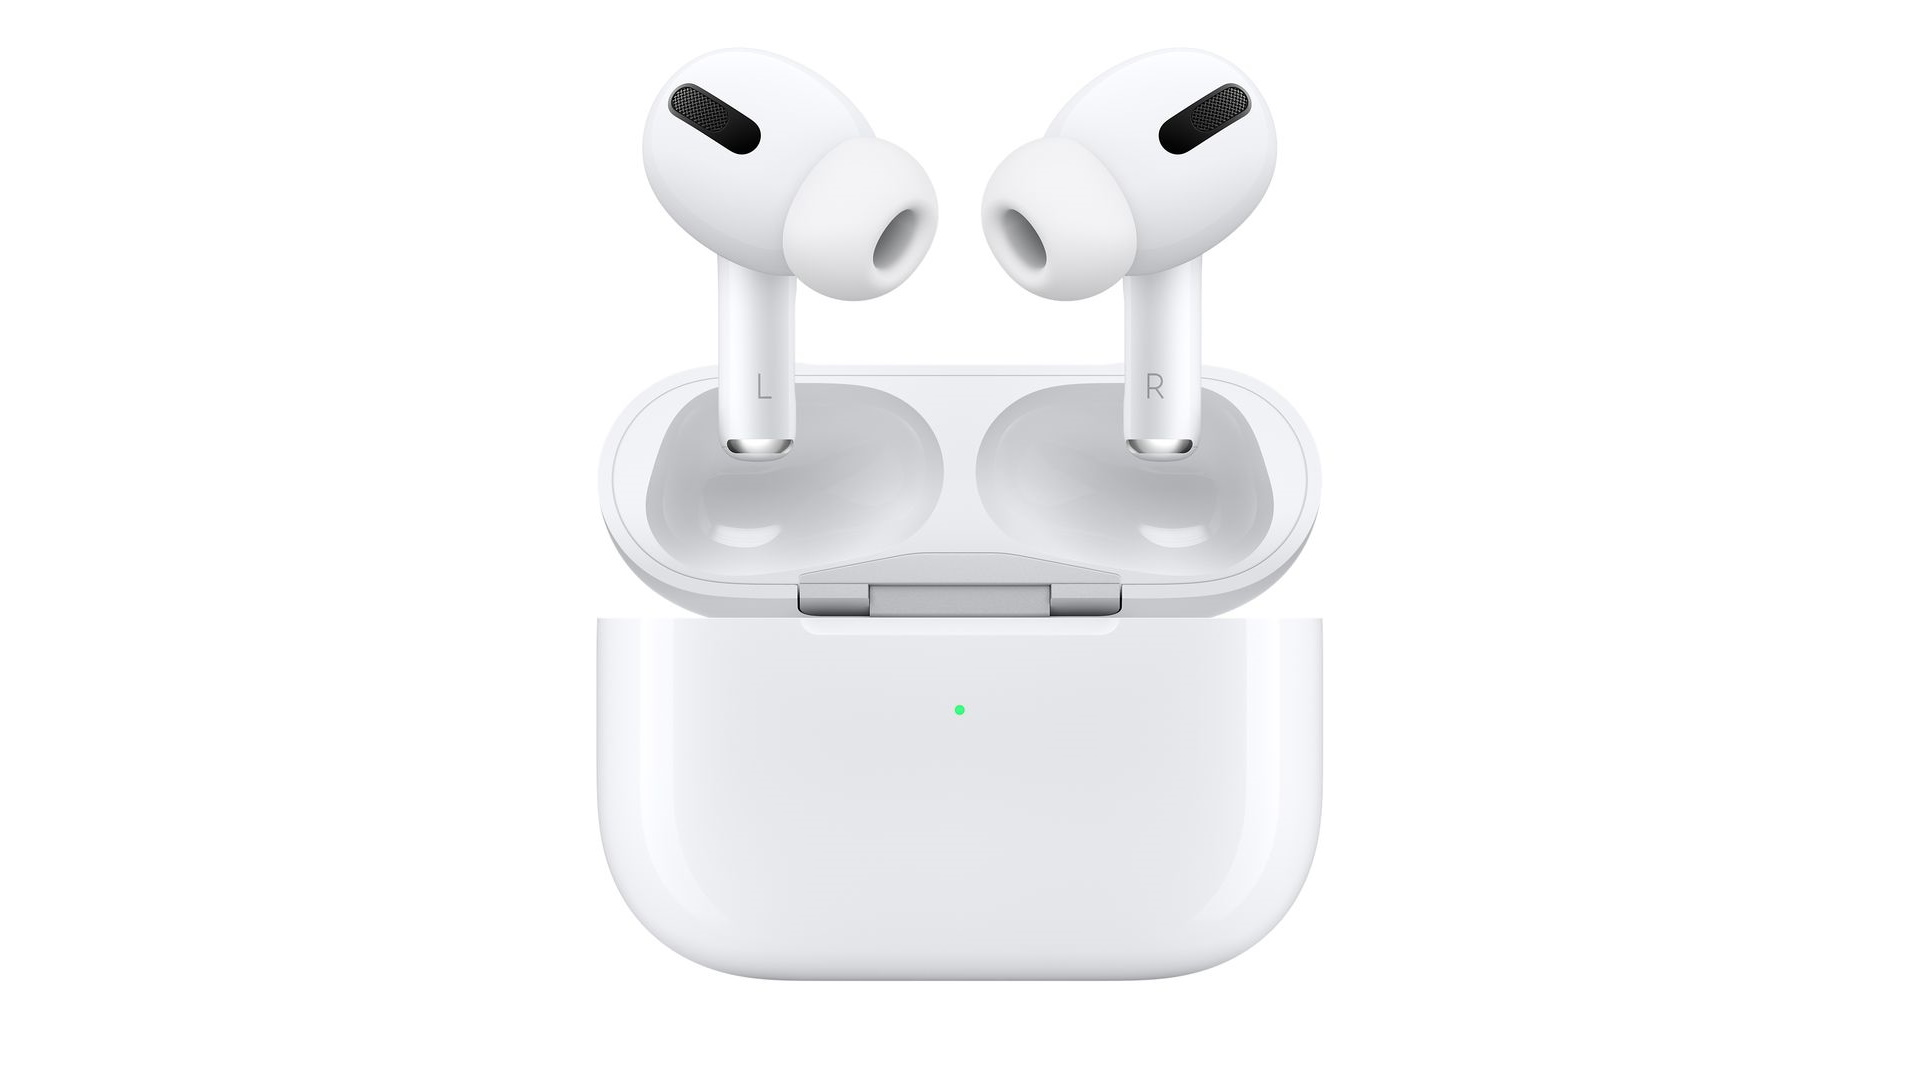 Two AirPods in a case